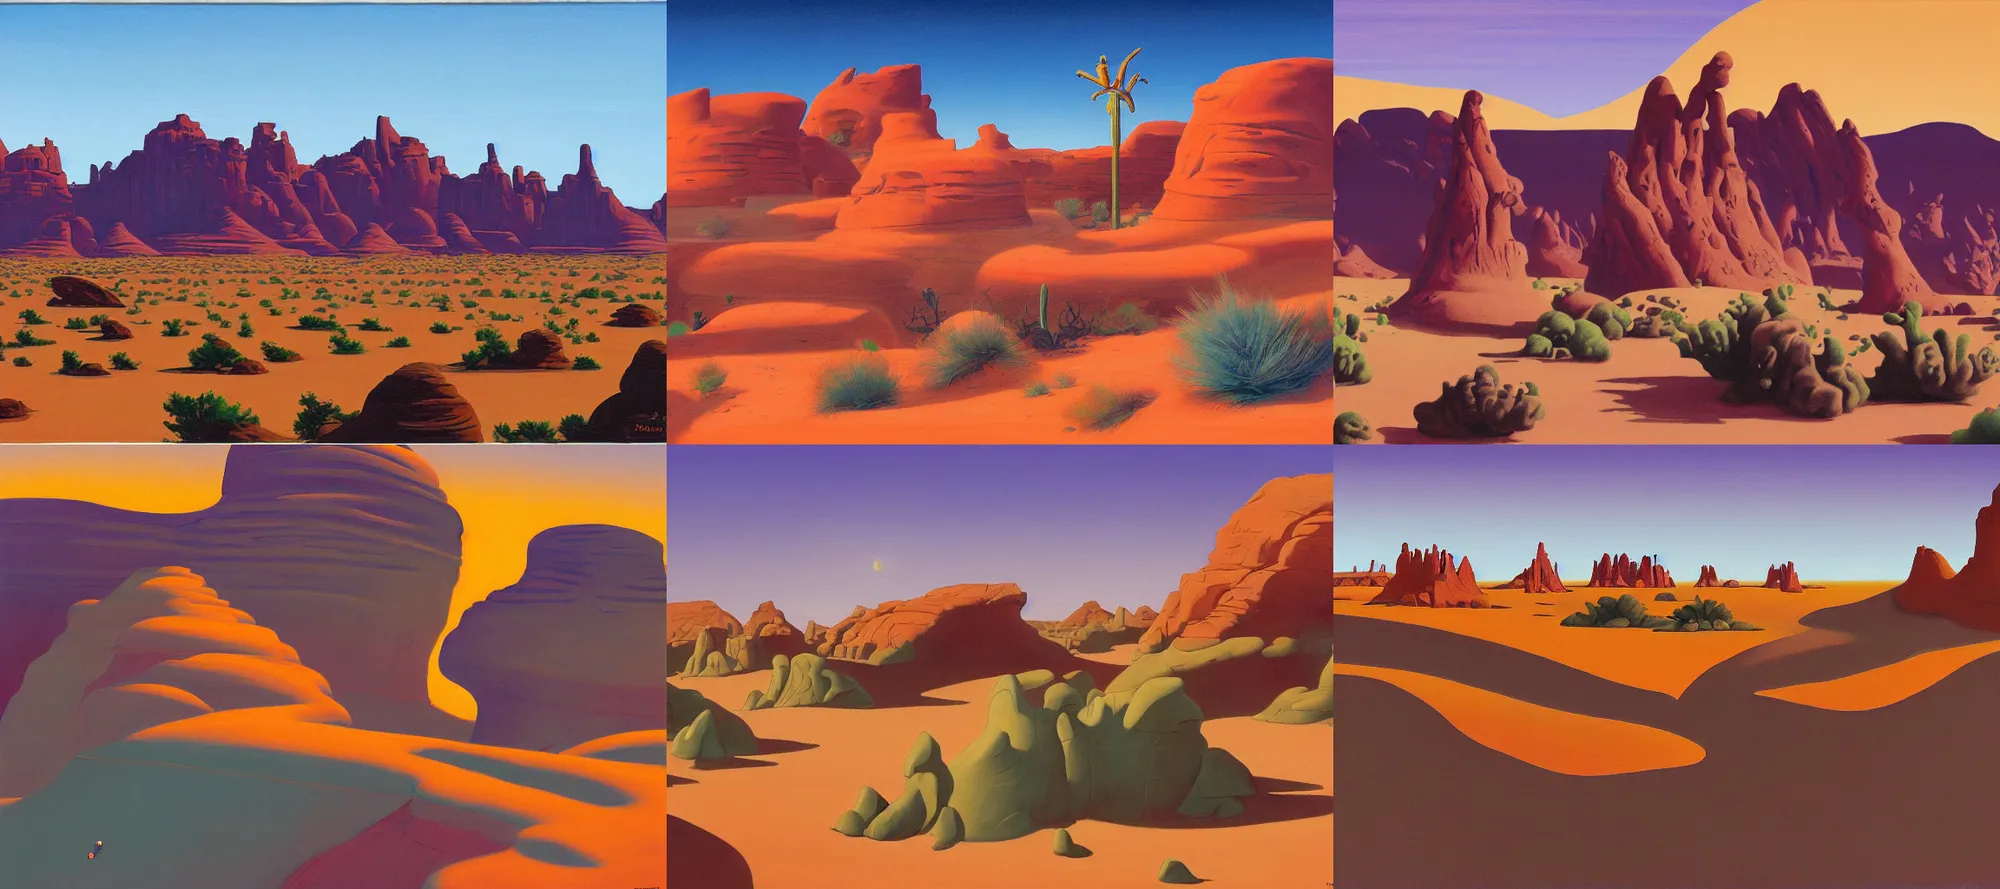 Prompt: Arizona desert landscape in the style of Dr. Seuss, starships, painting by Ralph McQuarrie